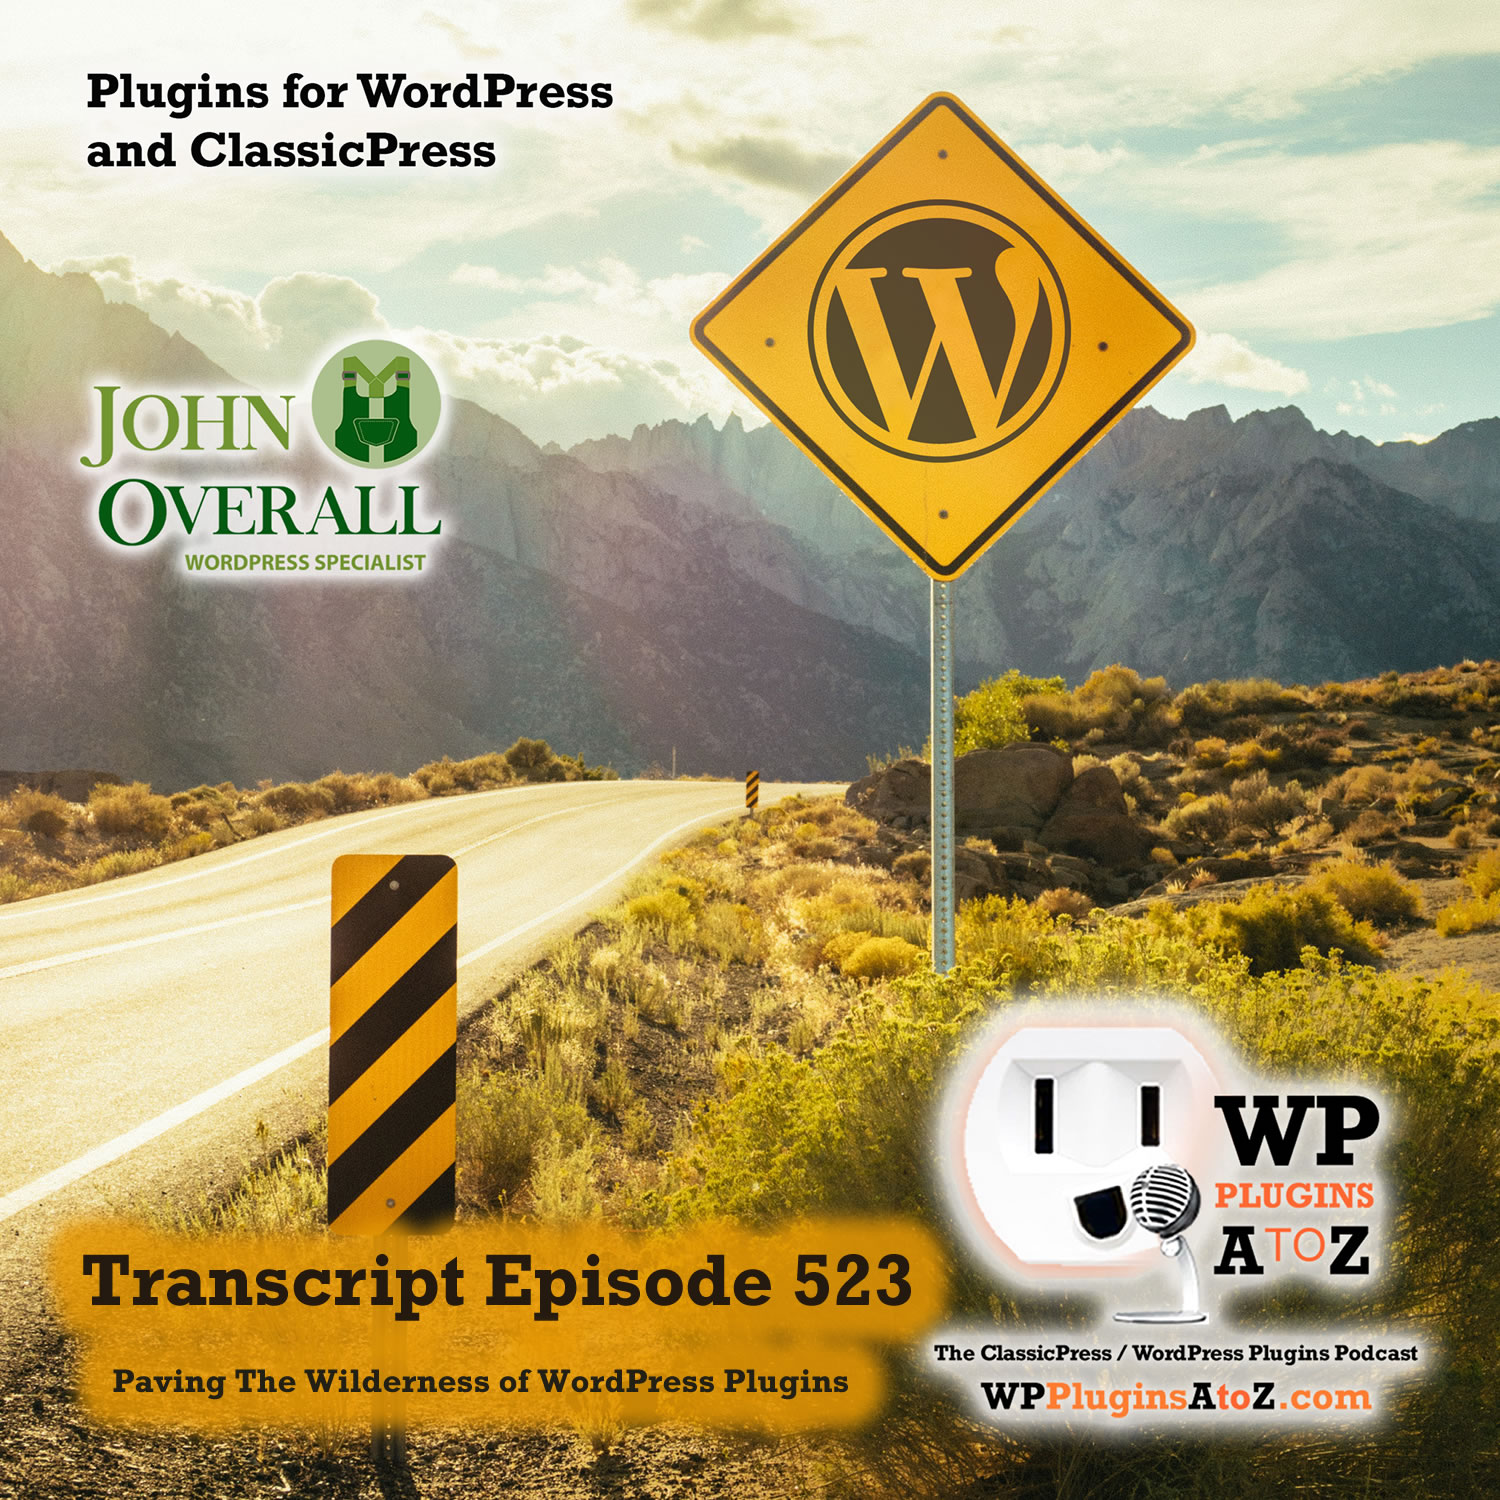 It's Episode 523 - We have plugins for WooCommerce Rewards, Creating Notes, Stop Fullscreen, Plugins checks, Moderate comments, Sales Funnels ... and ClassicPress Options. It's all coming up on WordPress Plugins A-Z!